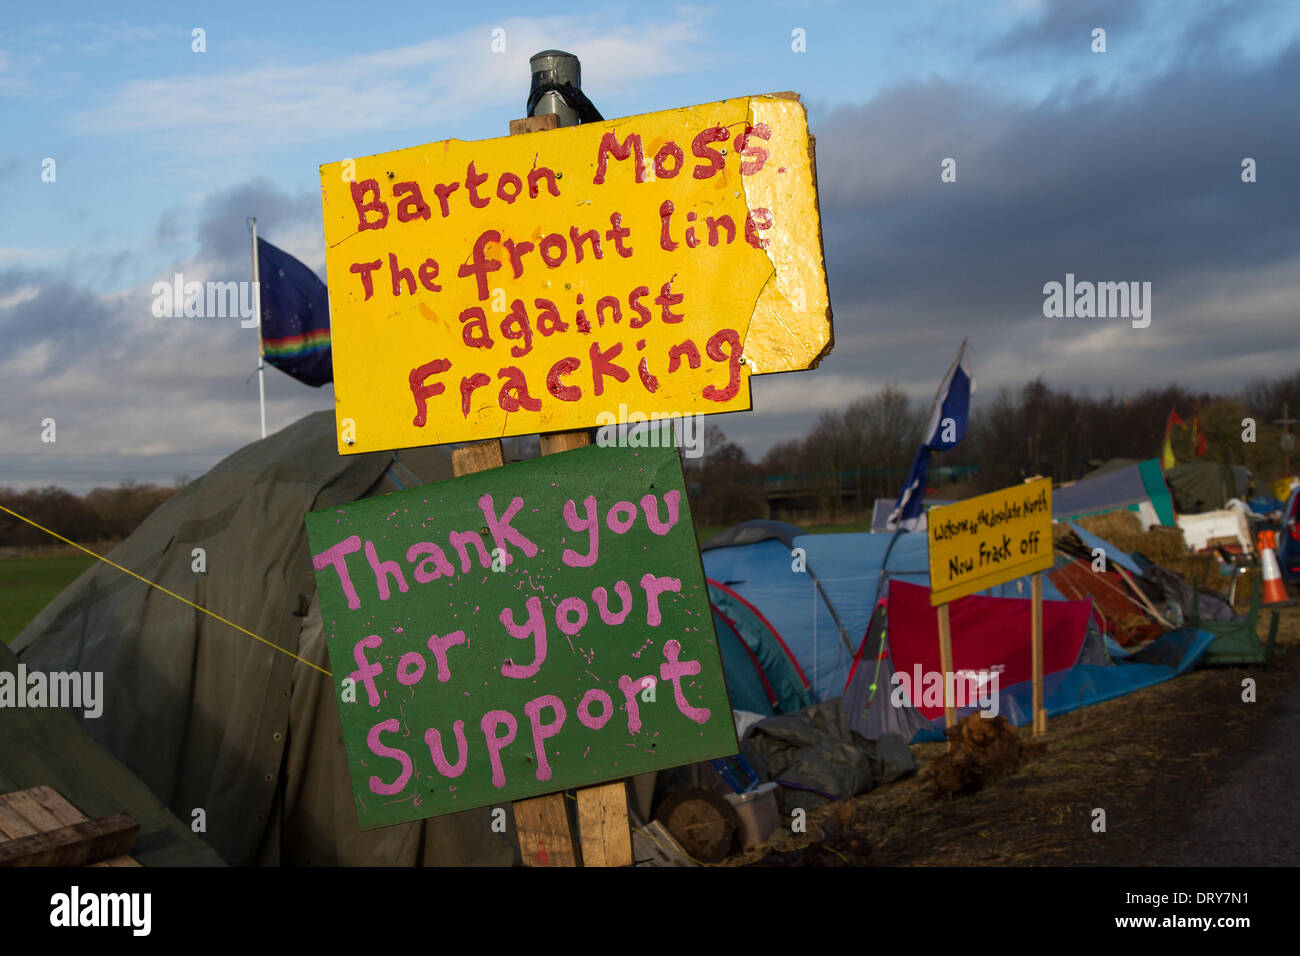 Manchester, Barton Moss, UK. 4th February, 2014.  'Barton Moss the front line against fracking' Protests at IGAS Drilling Site, Greater Manchester Policing operation at Barton Moss Drilling Site as Cuadrilla, as one of the energy firms hoping to exploit the UK's shale gas resources, announces two new exploration sites in Lancashire. ... to drill and frack at two sites at Roseacre Wood and Little Plumpton. Credit:  Mar Photographics/Alamy Live News. Stock Photo